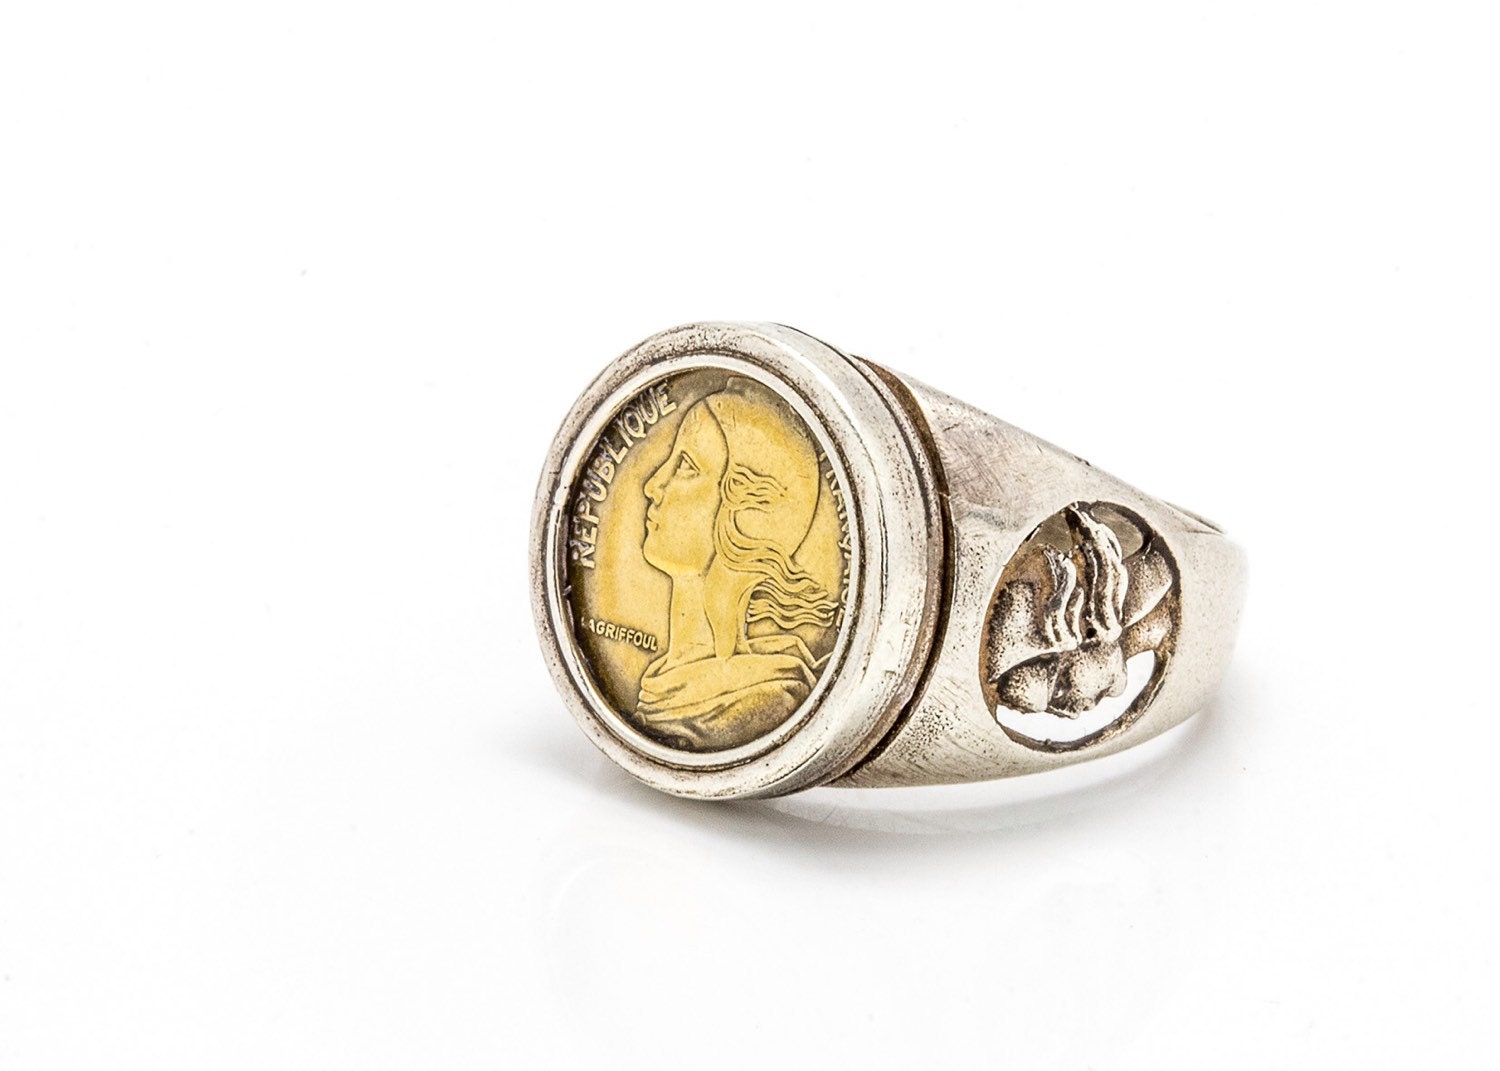 An Amazing Old Coin Ring With the 5 Centimes Coin of France - Etsy